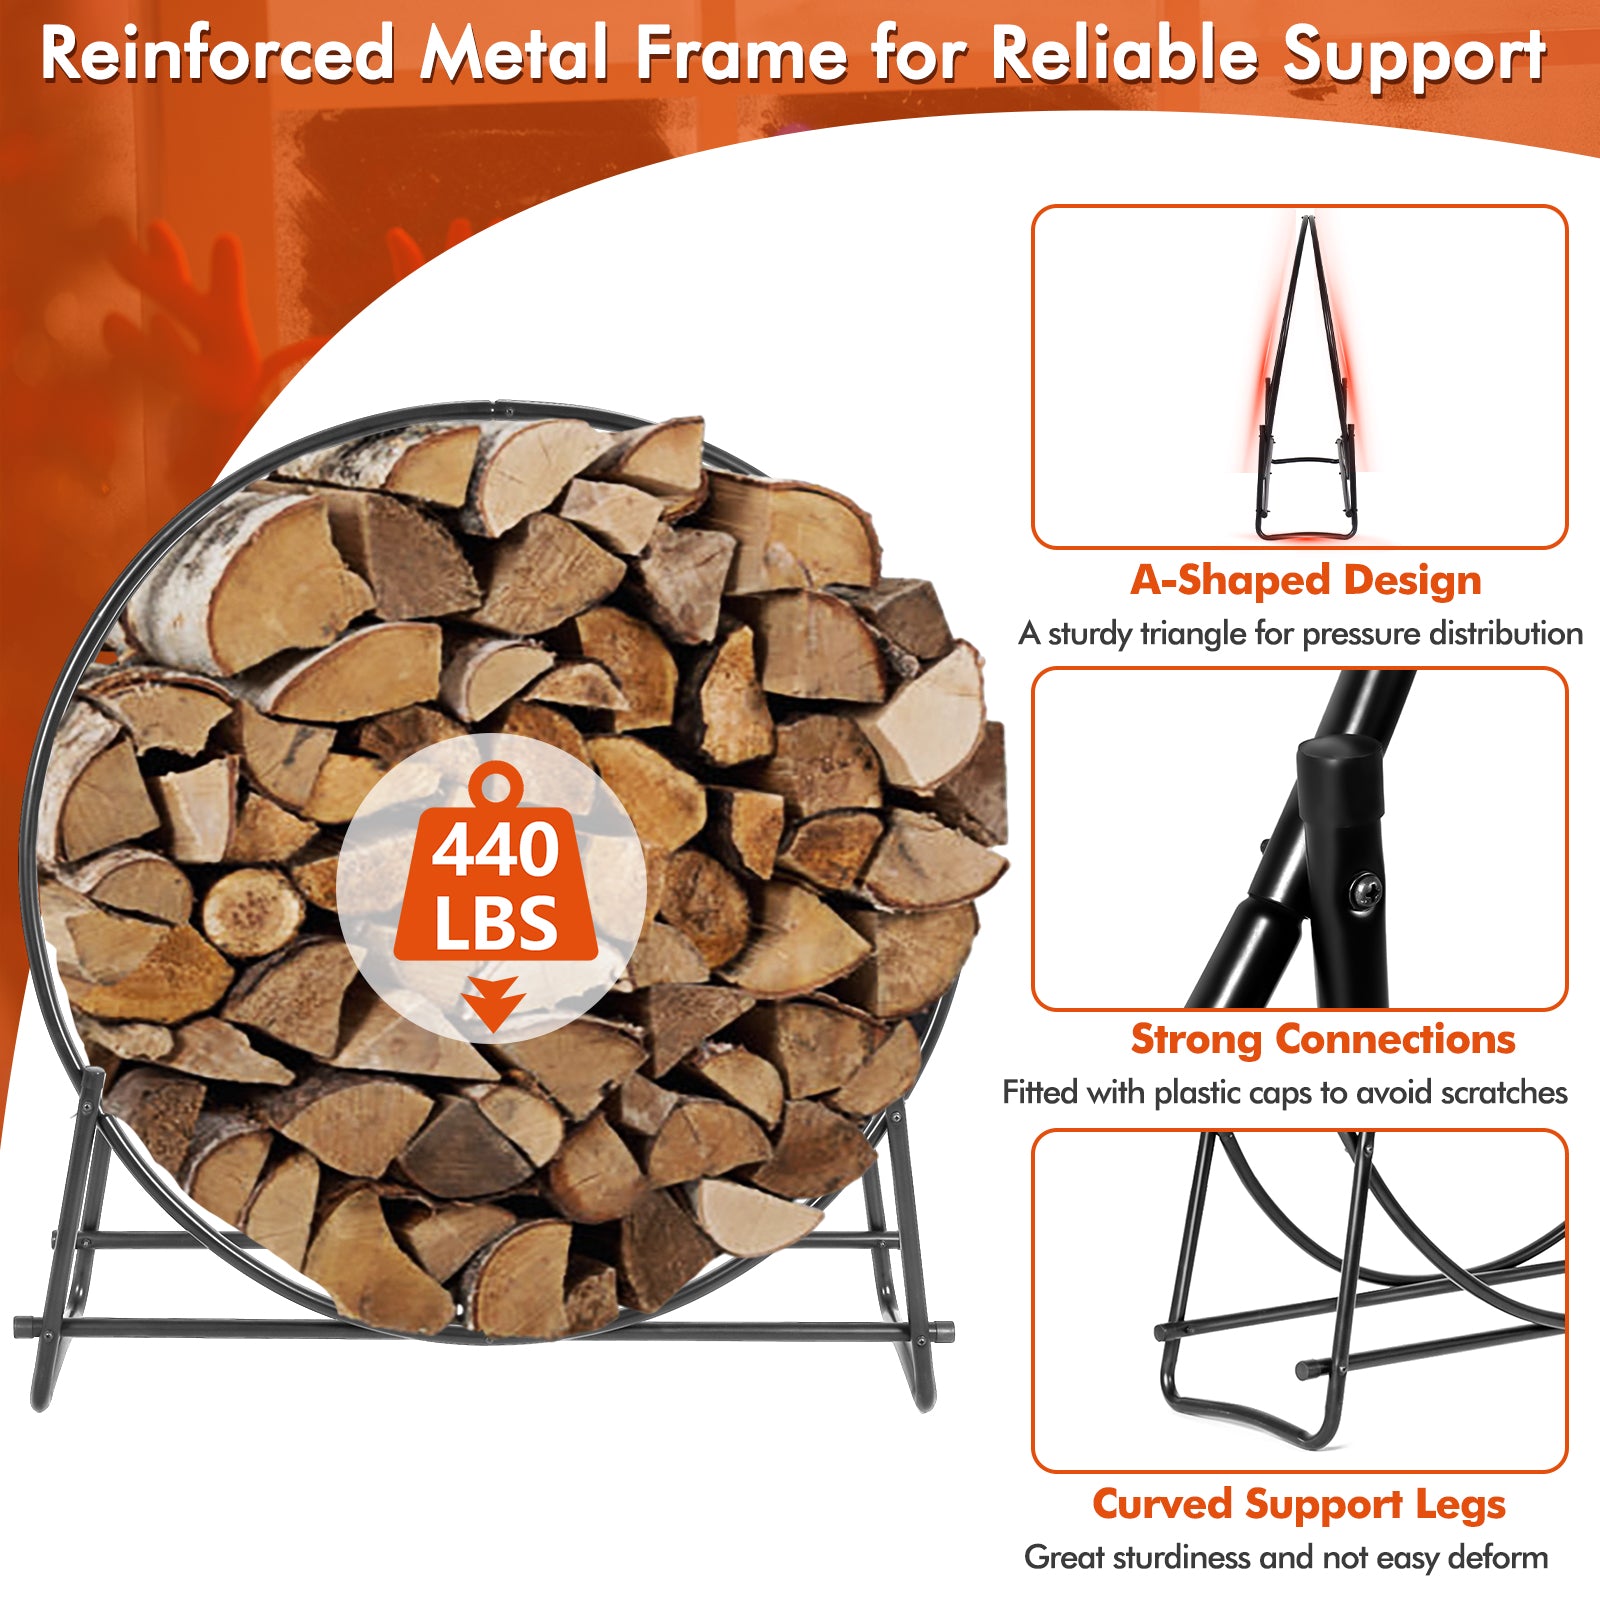 40-inch Tubular Steel Firewood Storage Rack - Direct by Wilsons Home Store